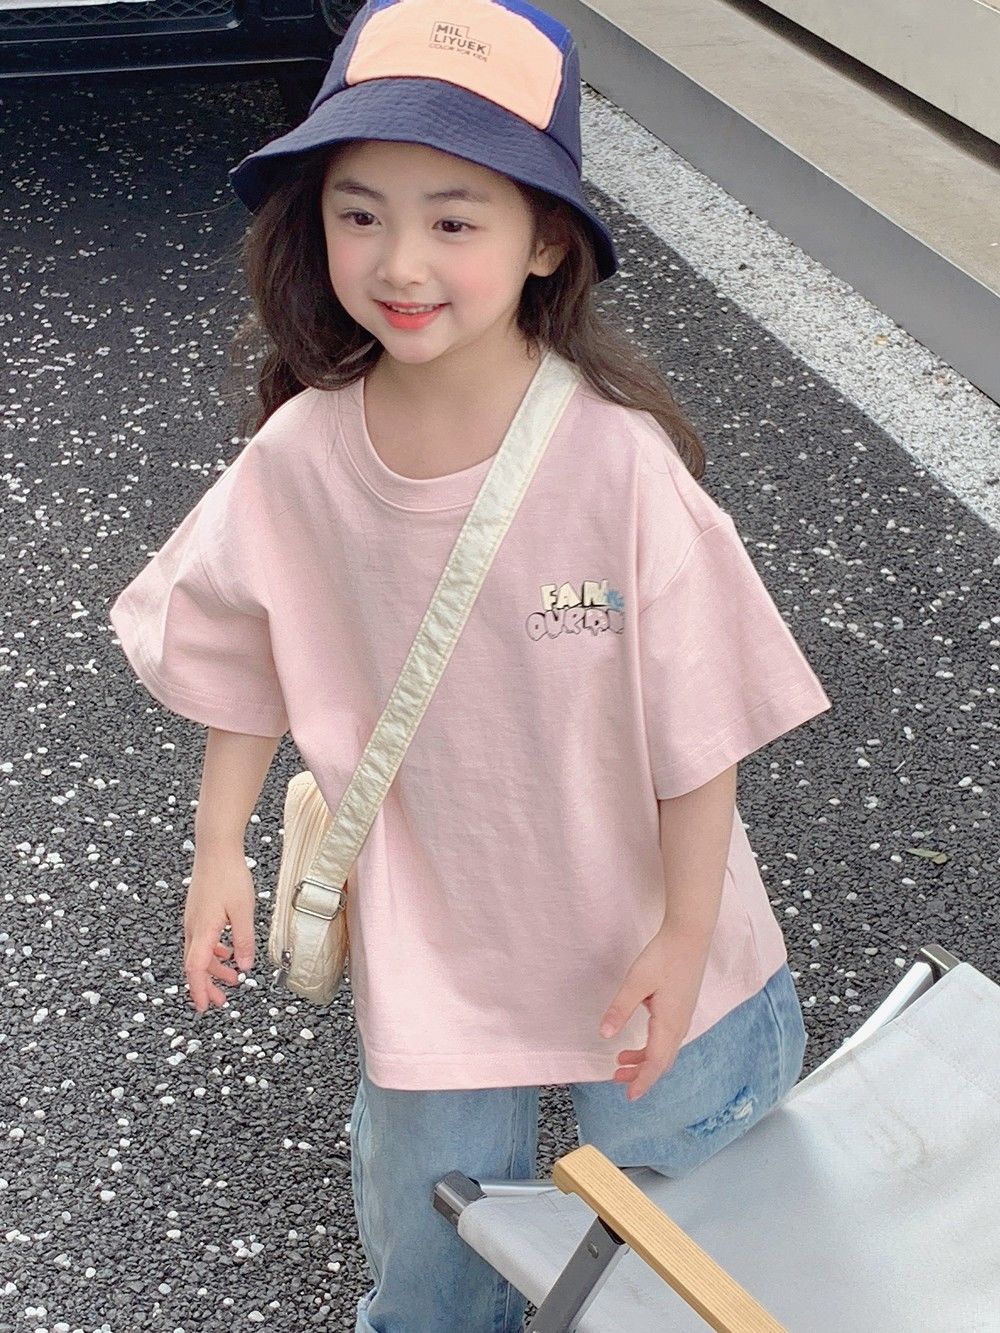 Girls' short-sleeved T-shirt 2023 summer new children's cotton bottoming shirt with foreign style printing loose casual top trend